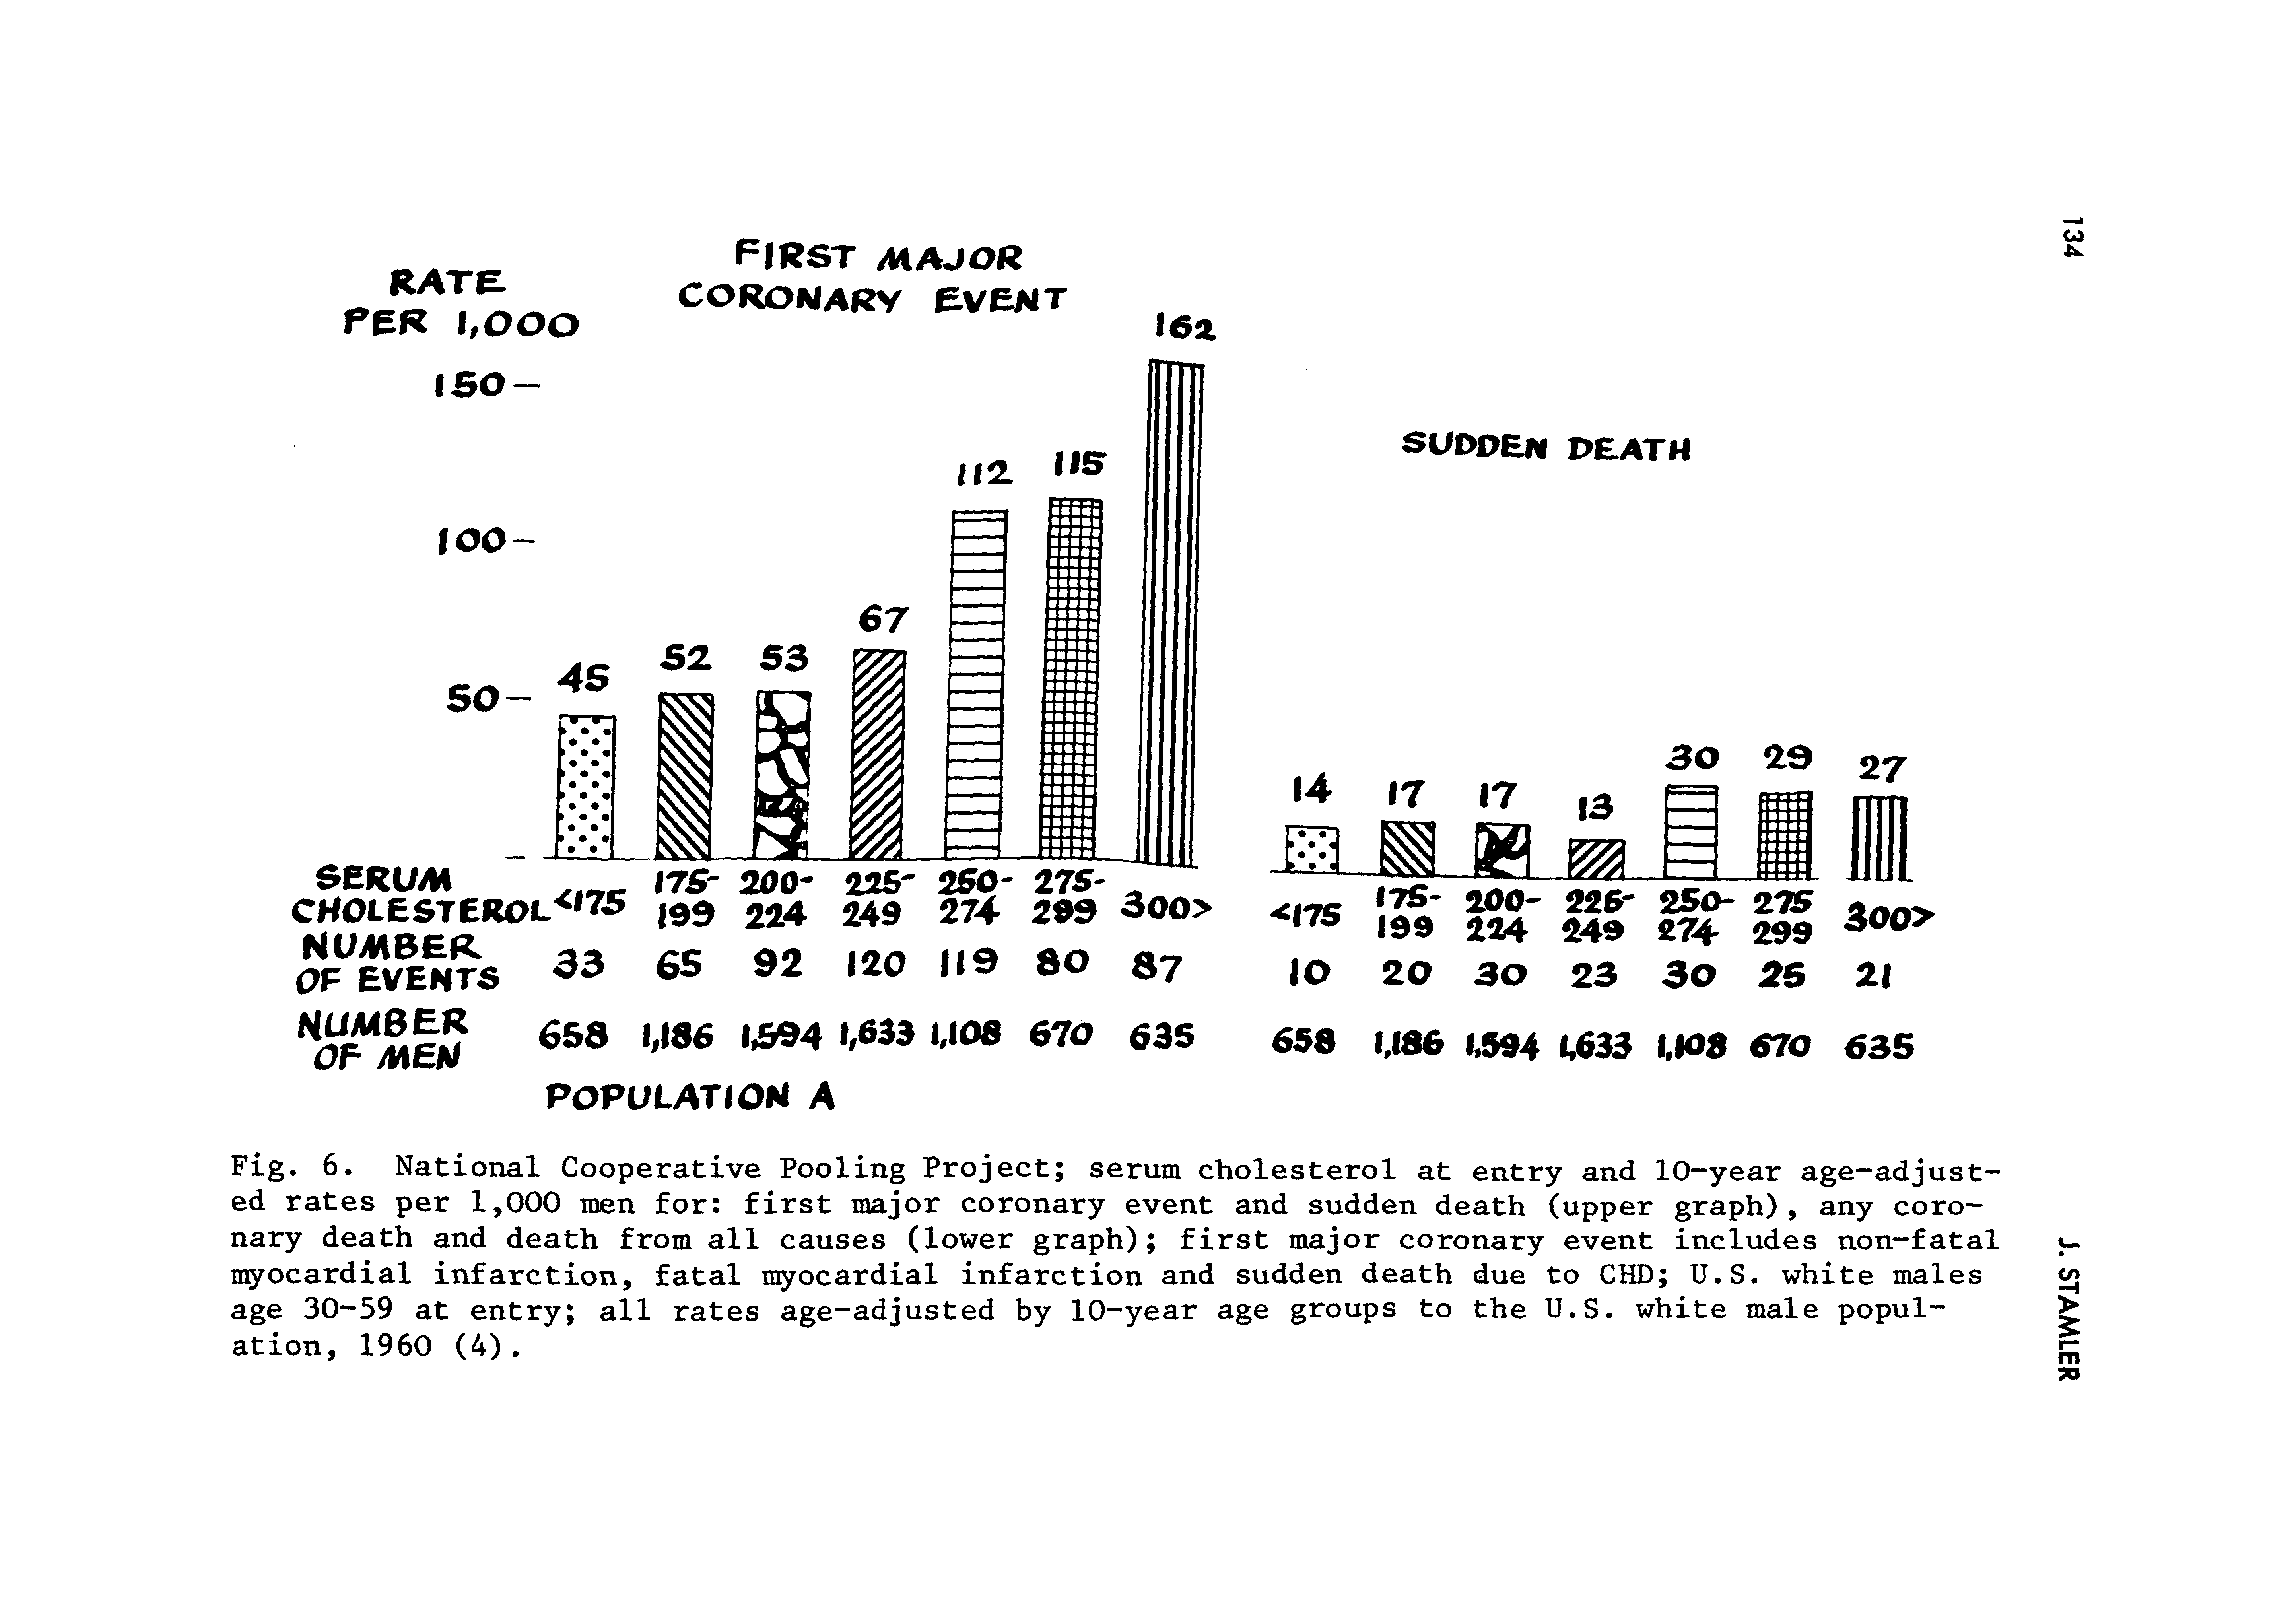 Fig. 6. National Cooperative Pooling Project serum cholesterol at entry and 10 year age-adjusted rates per 1,000 men for first major coronary event and sudden death (upper graph), any coronary death and death from all causes (lower graph) first major coronary event includes non-fatal myocardial infarction, fatal myocardial infarction and sudden death due to CHD U.S. white males age 30-59 at entry all rates age-adjusted by 10-year age groups to the U.S. white male population, 1960 (4).